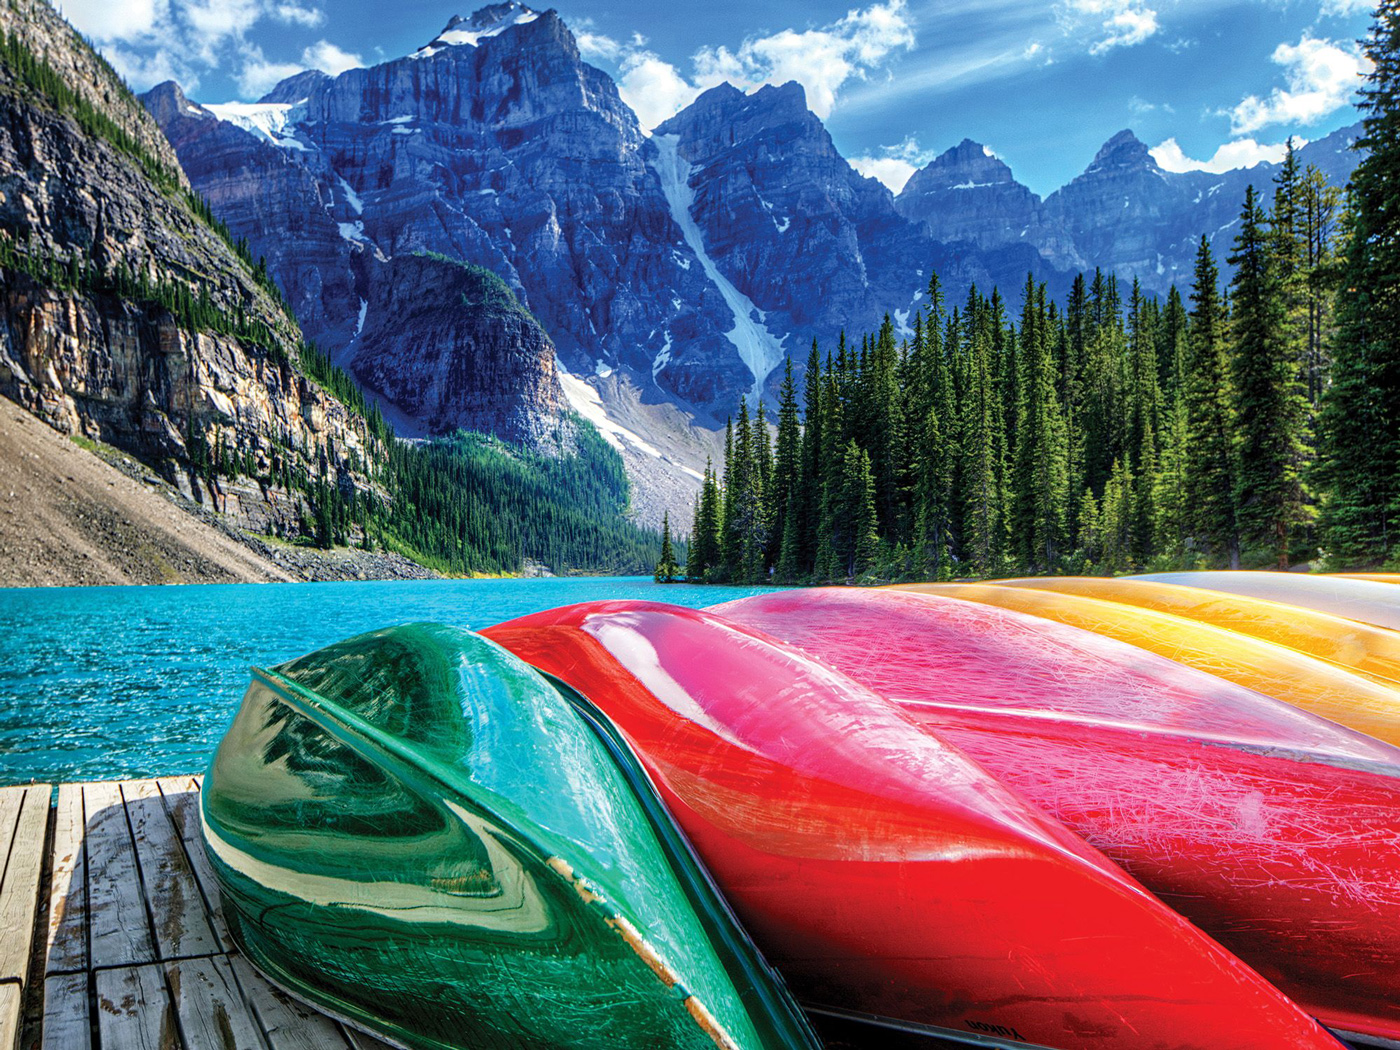 Take Me to the Mountains Boat Jigsaw Puzzle